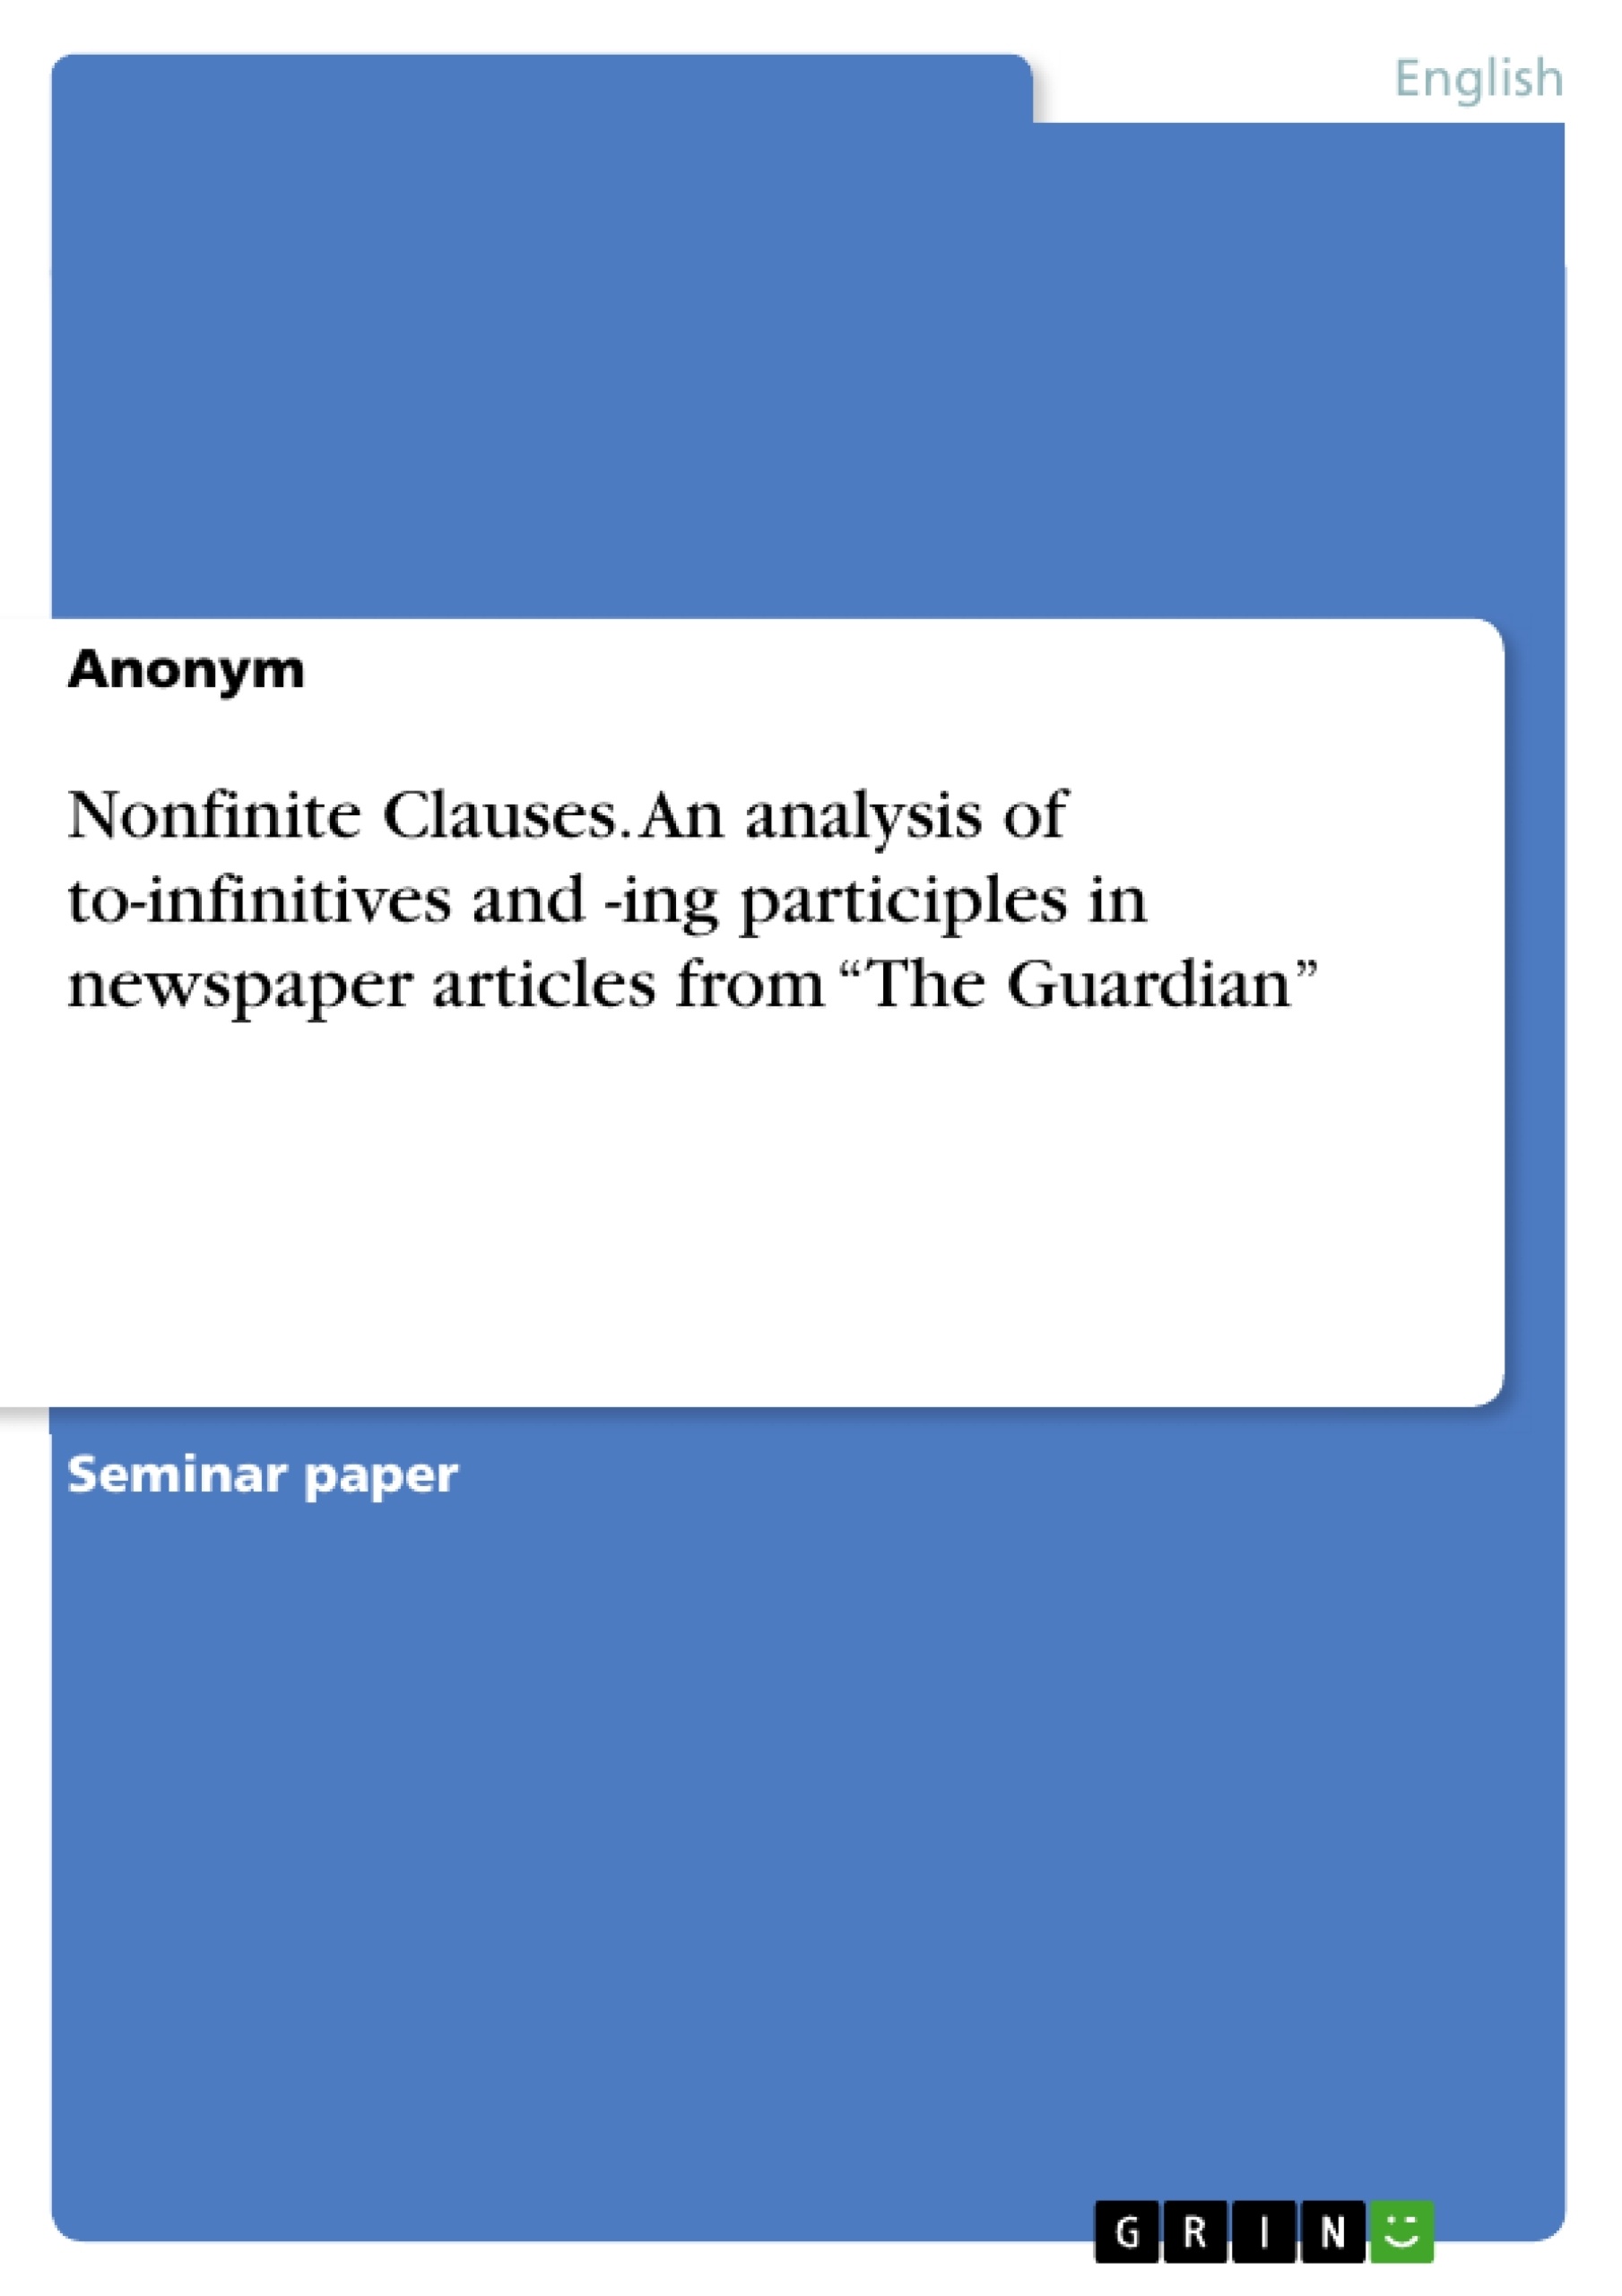 Titel: Nonfinite Clauses. An analysis of  to-infinitives and -ing participles in newspaper articles from “The Guardian”